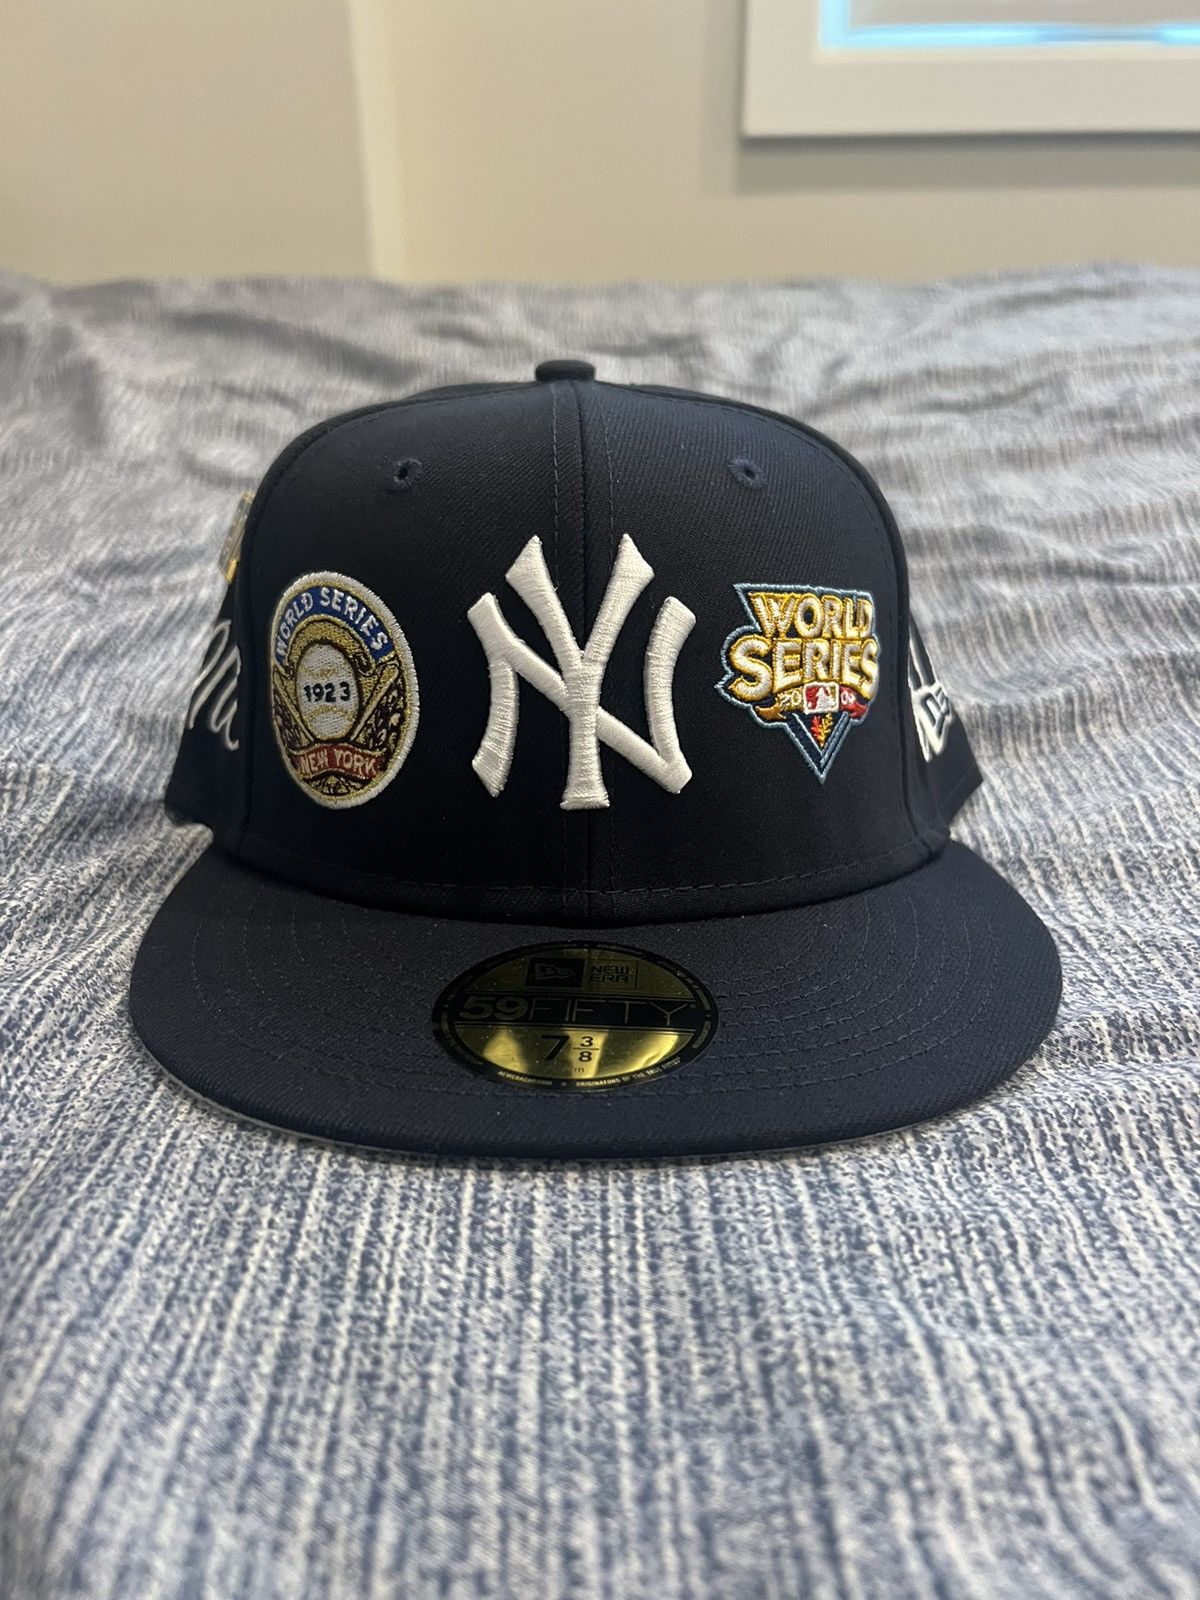 New Era 7 3/8 Historic World Series Champions Fitted | Grailed